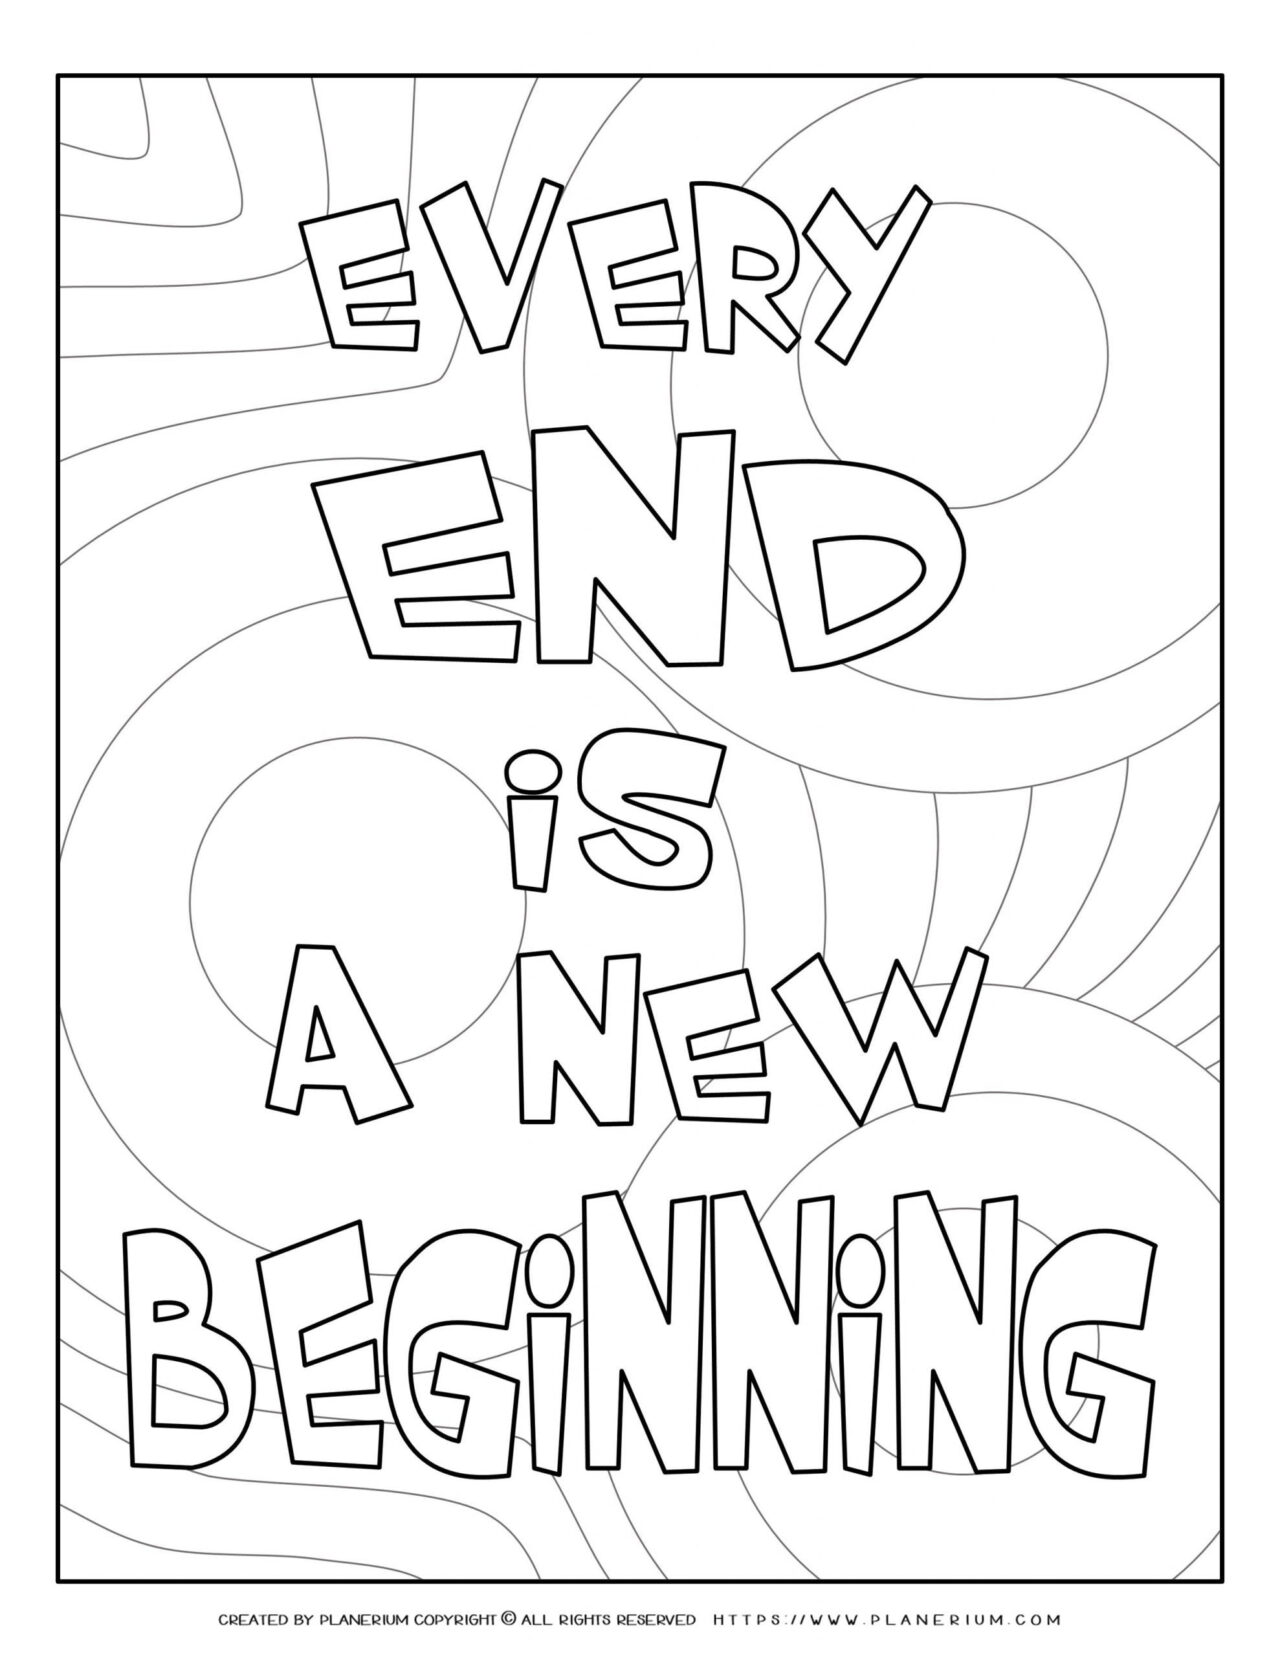 End of Year - Coloring Page - Every End is a New Begining